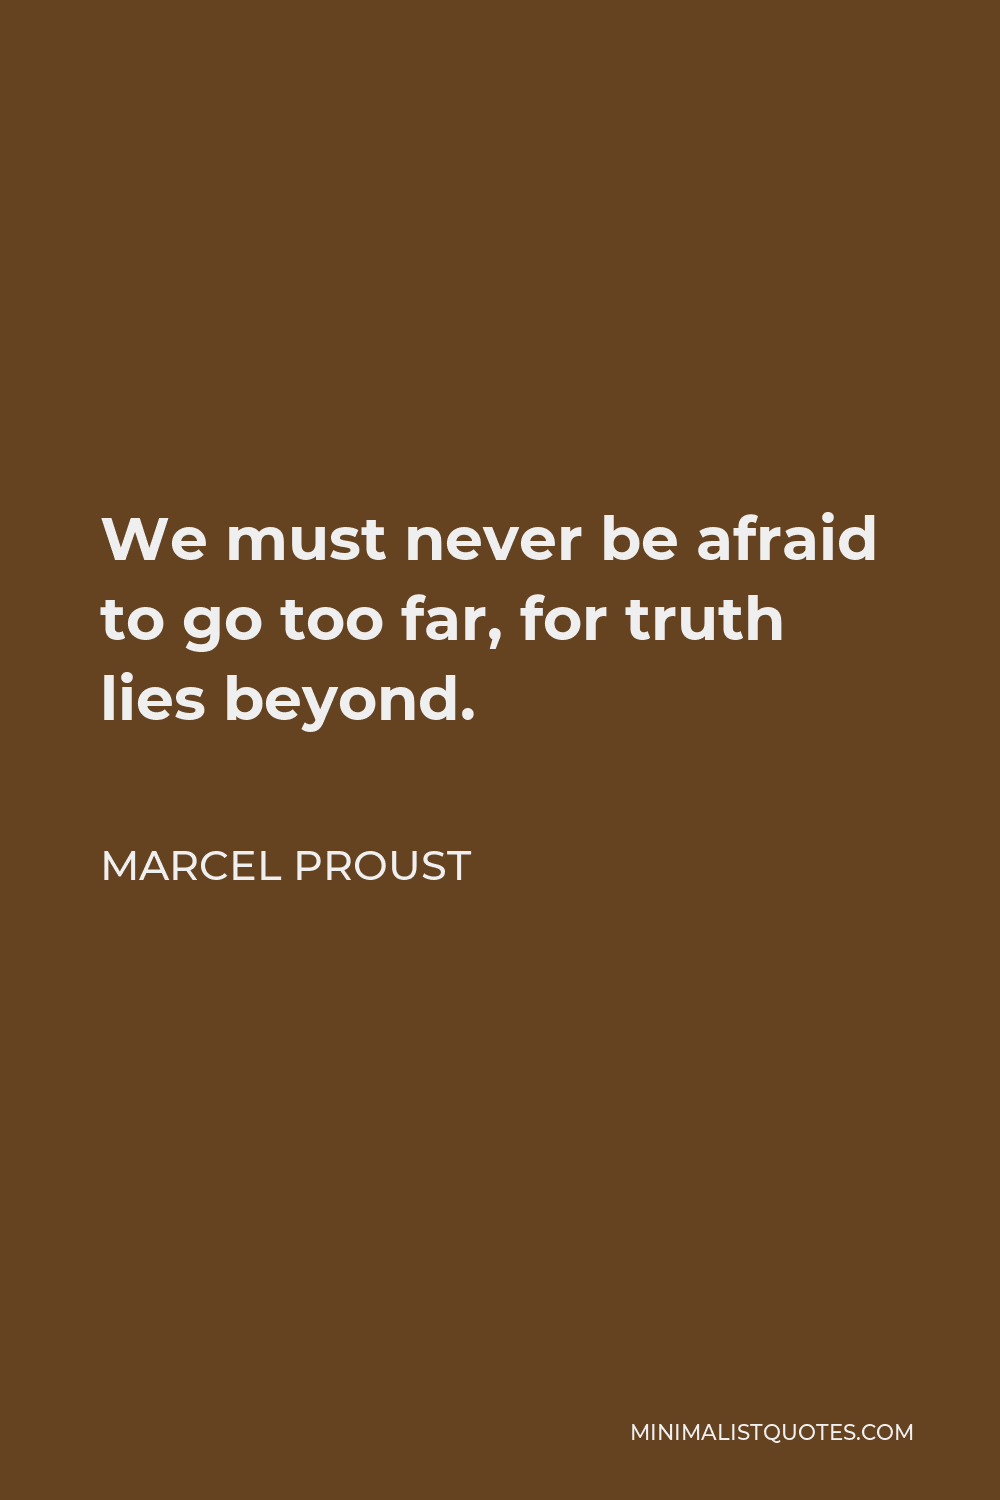 Marcel Proust Quote - We must never be afraid to go too far, for truth lies beyond.